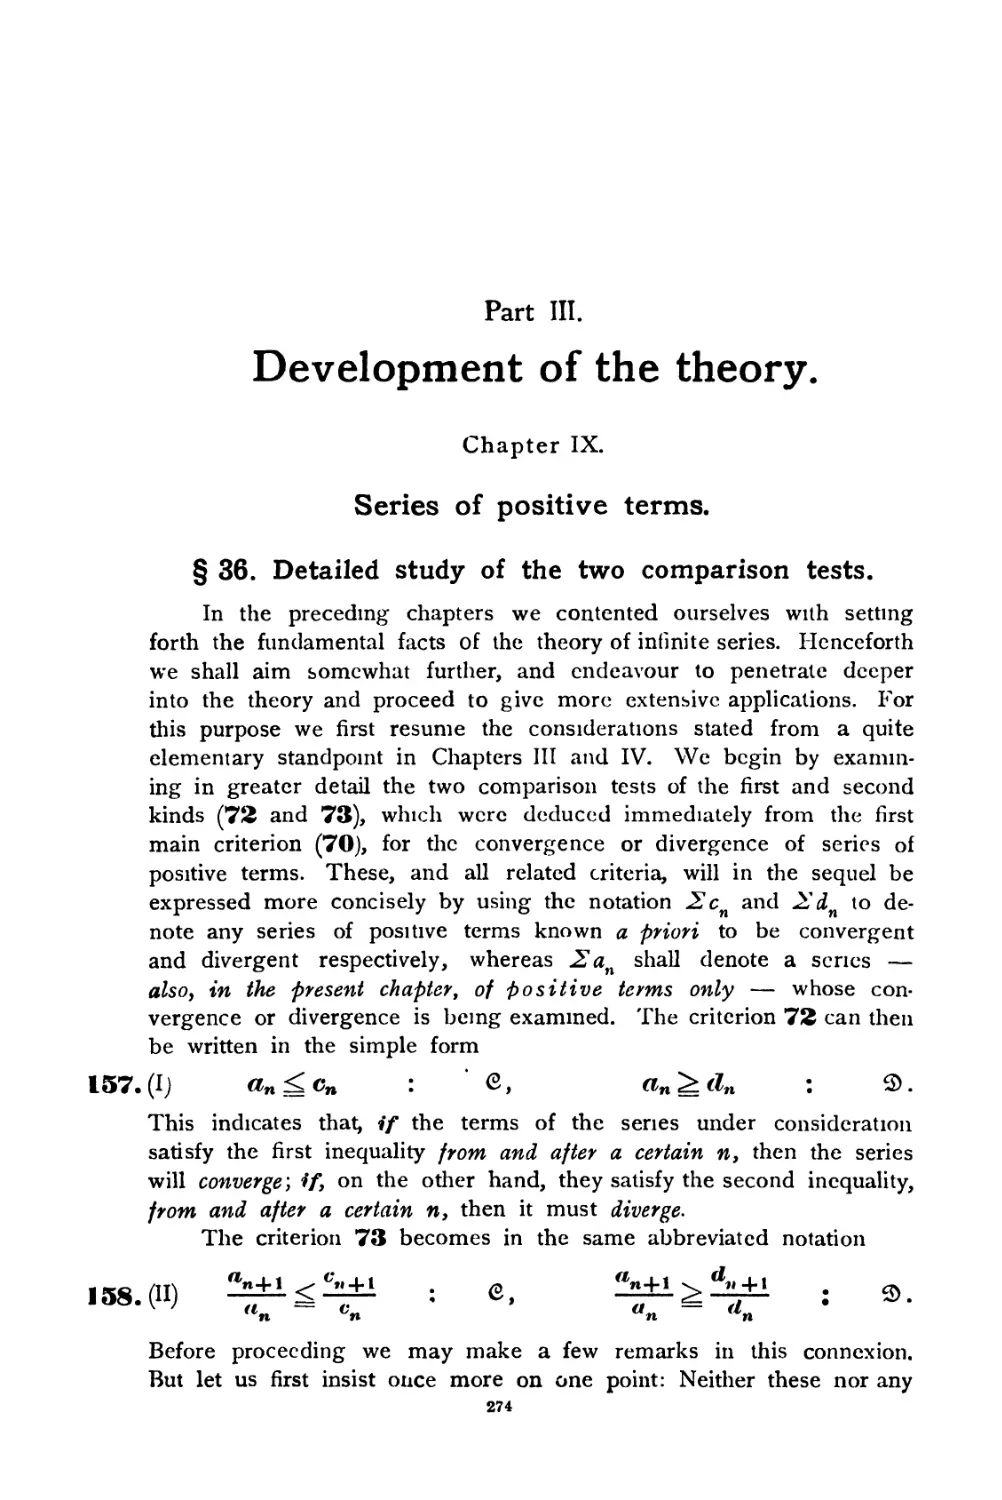 ---------- Part III. Development of the theory
Chapter IX. Series of positive terms